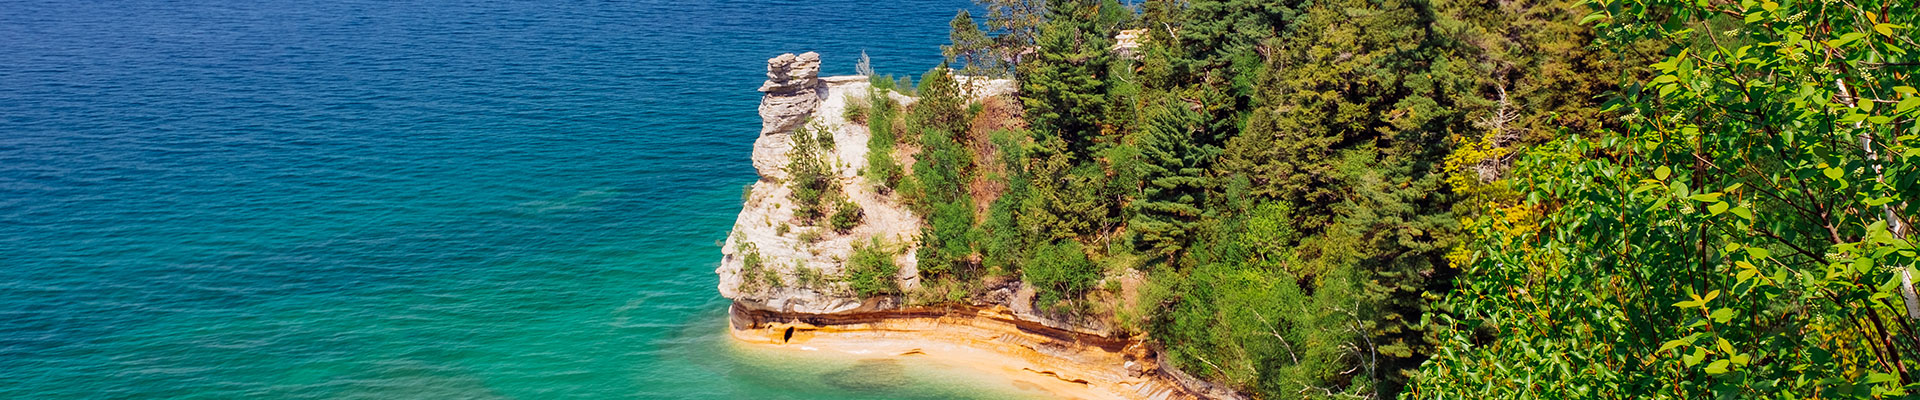 Fantasy RV Tours: 27 Day Great Lakes of North America (27UGLF-051922)